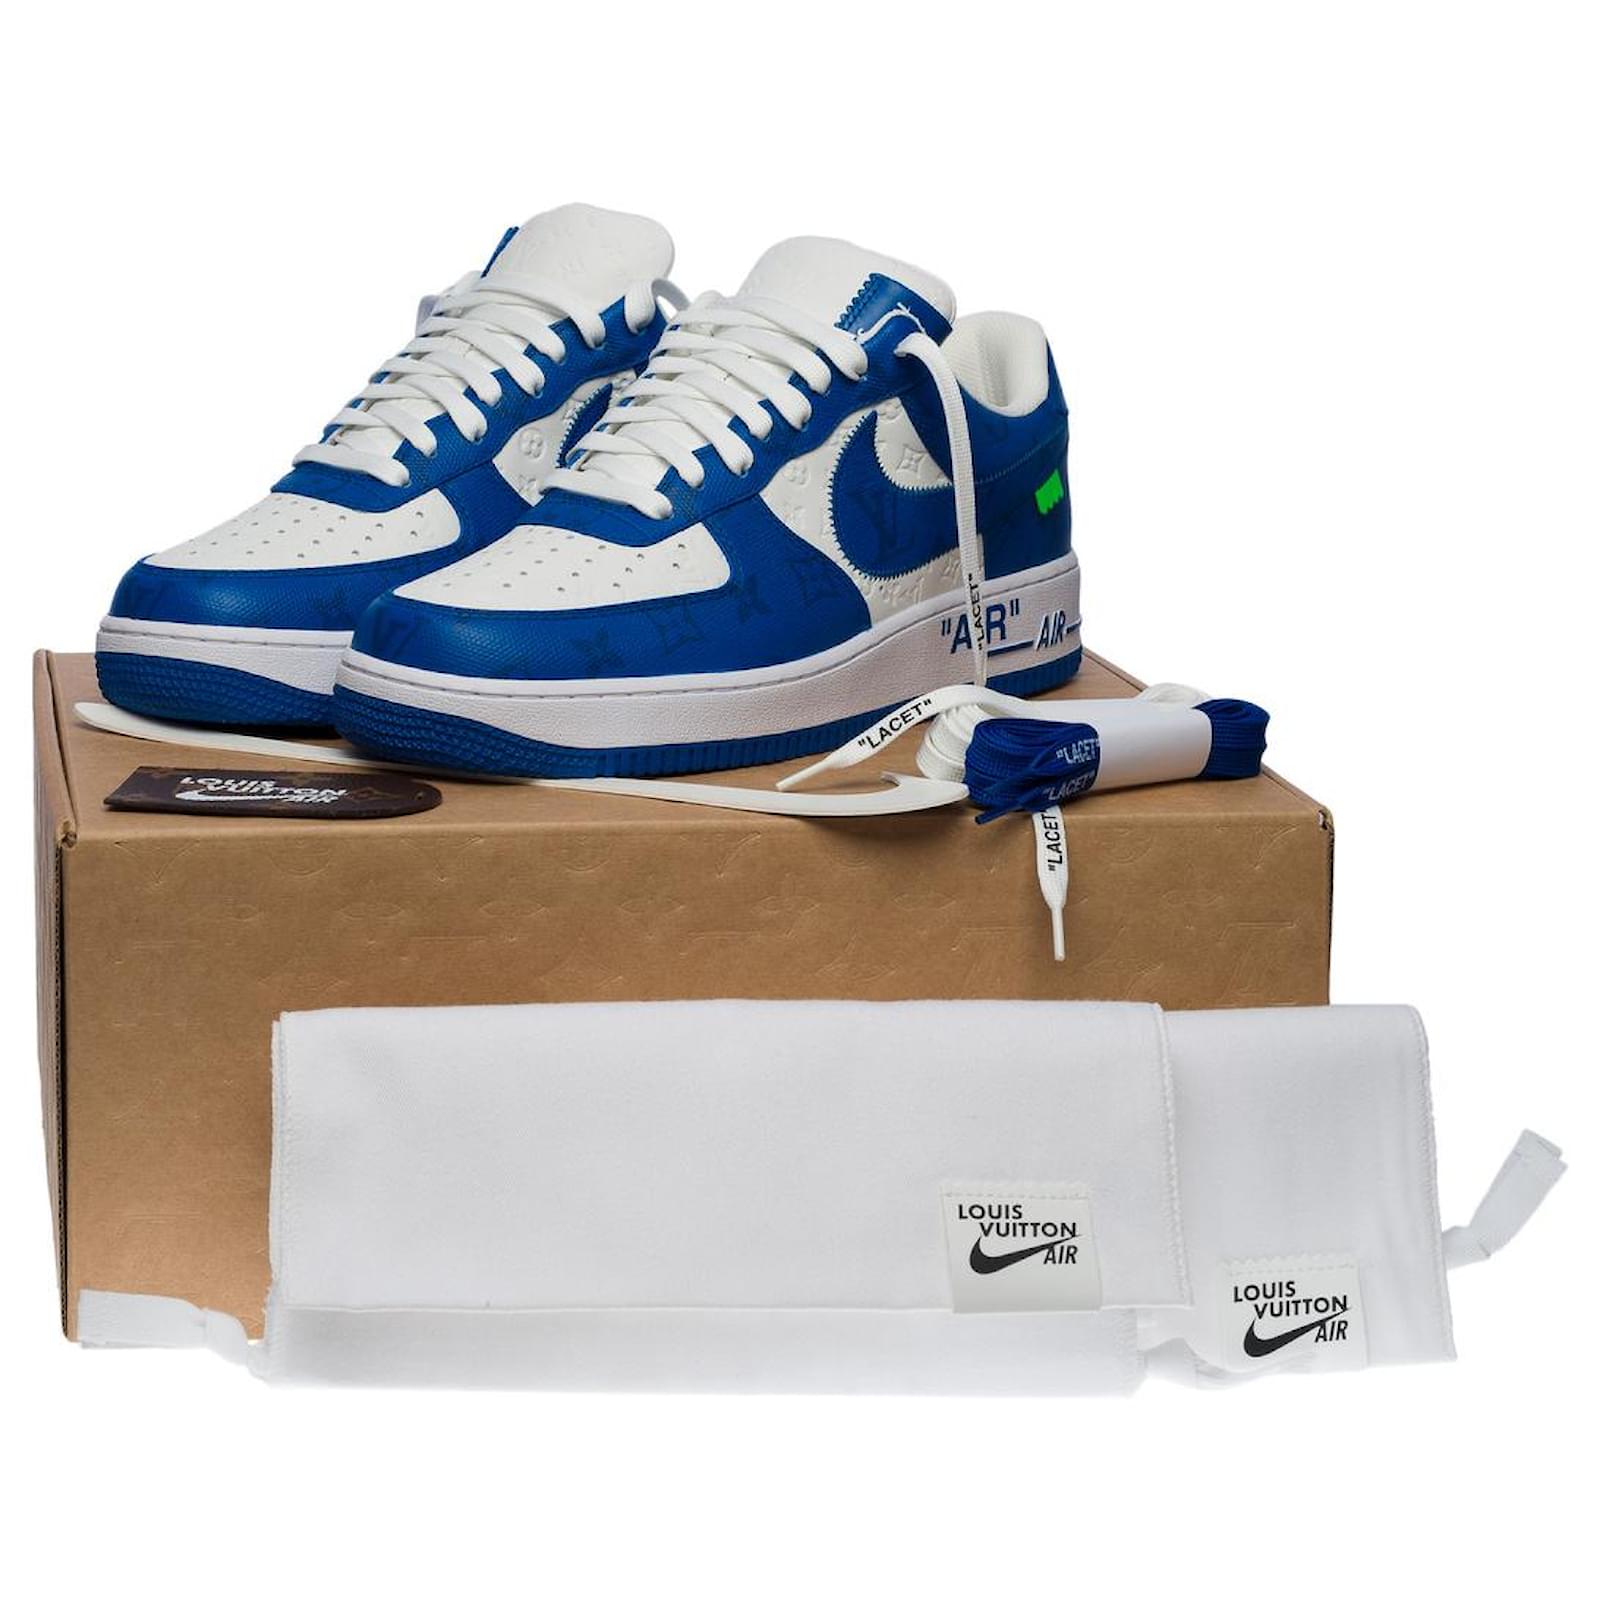 Brood Eerlijkheid Verzorger NEW - ULTRA LIMITED EDITION - NIKE X LOUIS VUITTON AIR FORCE SNEAKERS 1  "TEAM ROYALE" BLUE AND WHITE-100698 ref.855555 - Joli Closet